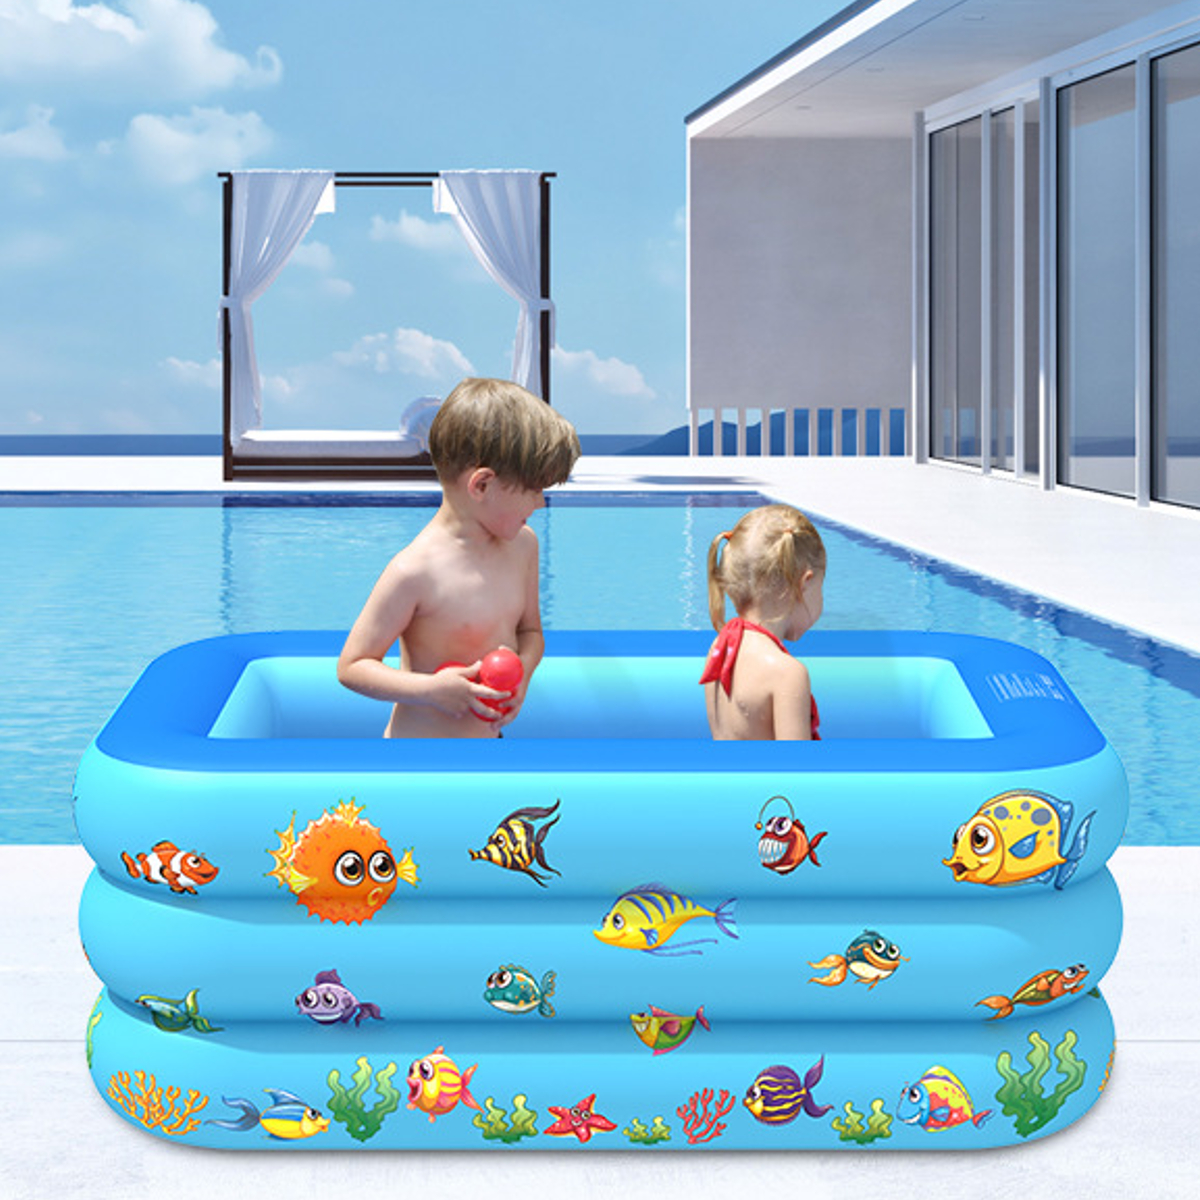 Inflatable-Swimming-Pool-Garden-Outdoor-PVC-Paddling-Pools-Kid-Game-Pool-1707398-9